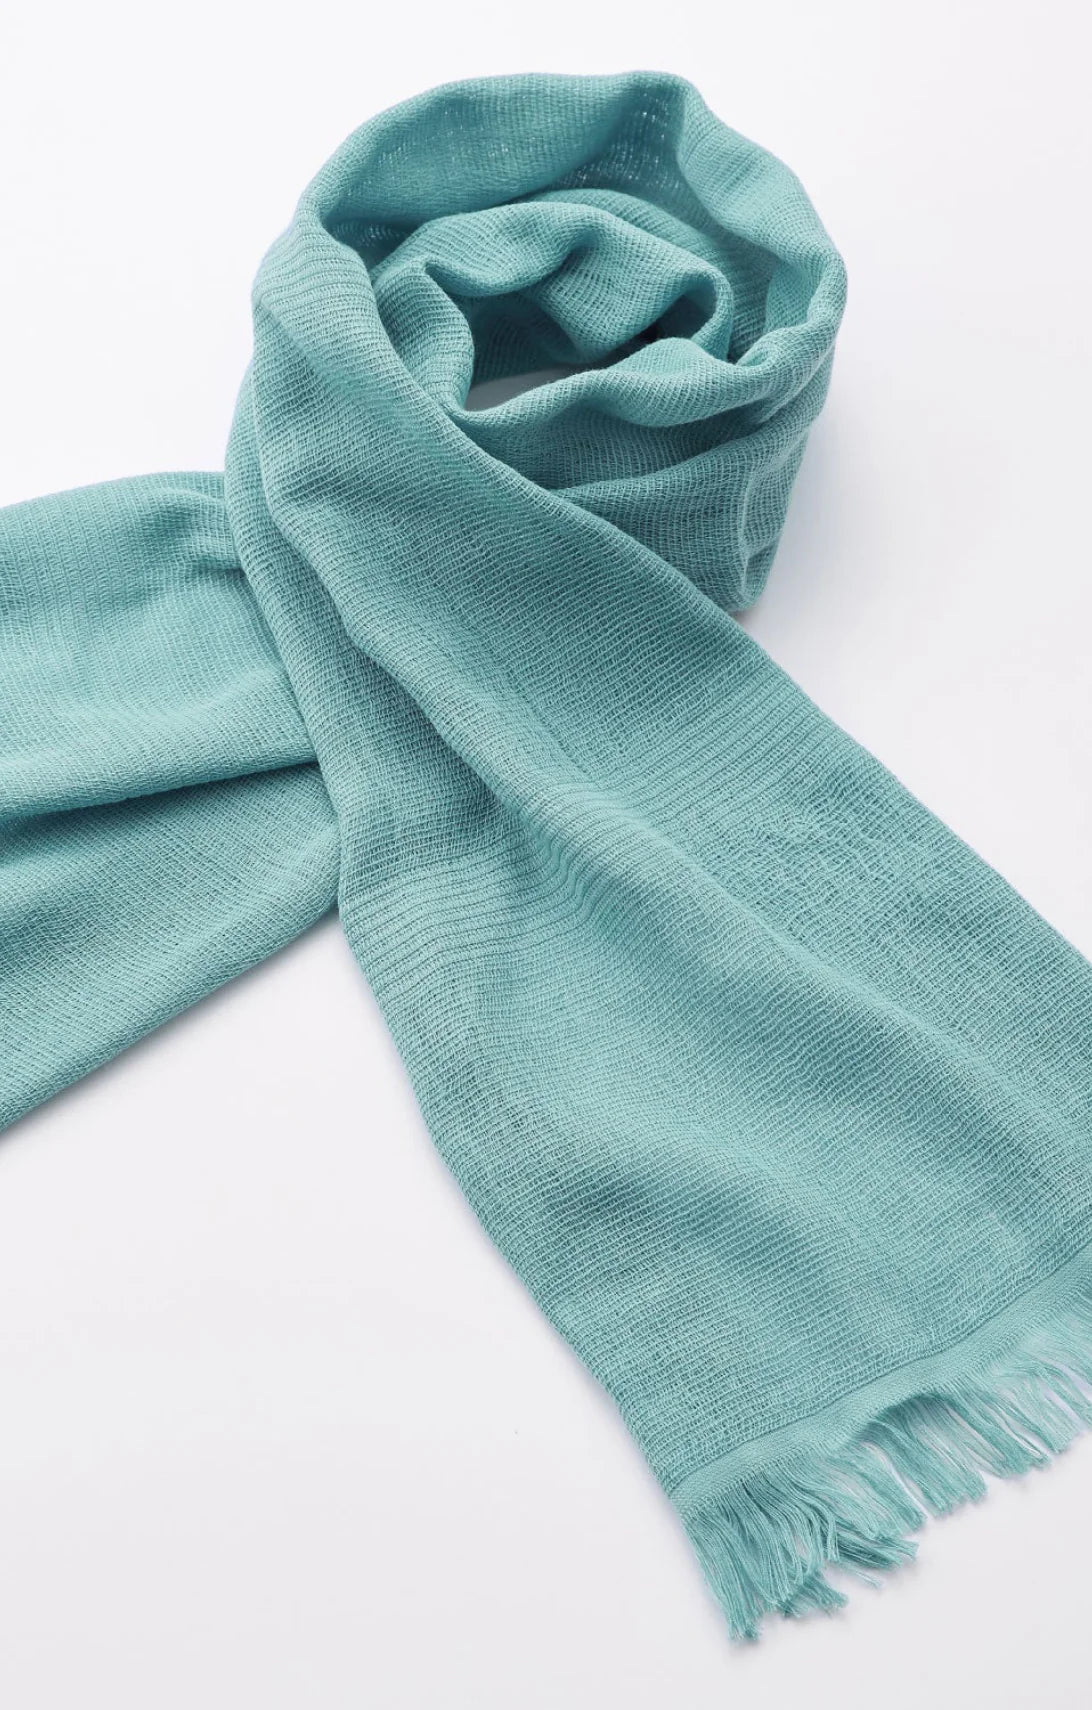 Tabbisocks Supima Organic Cotton Scarf in a light blue Dusty-Mint color